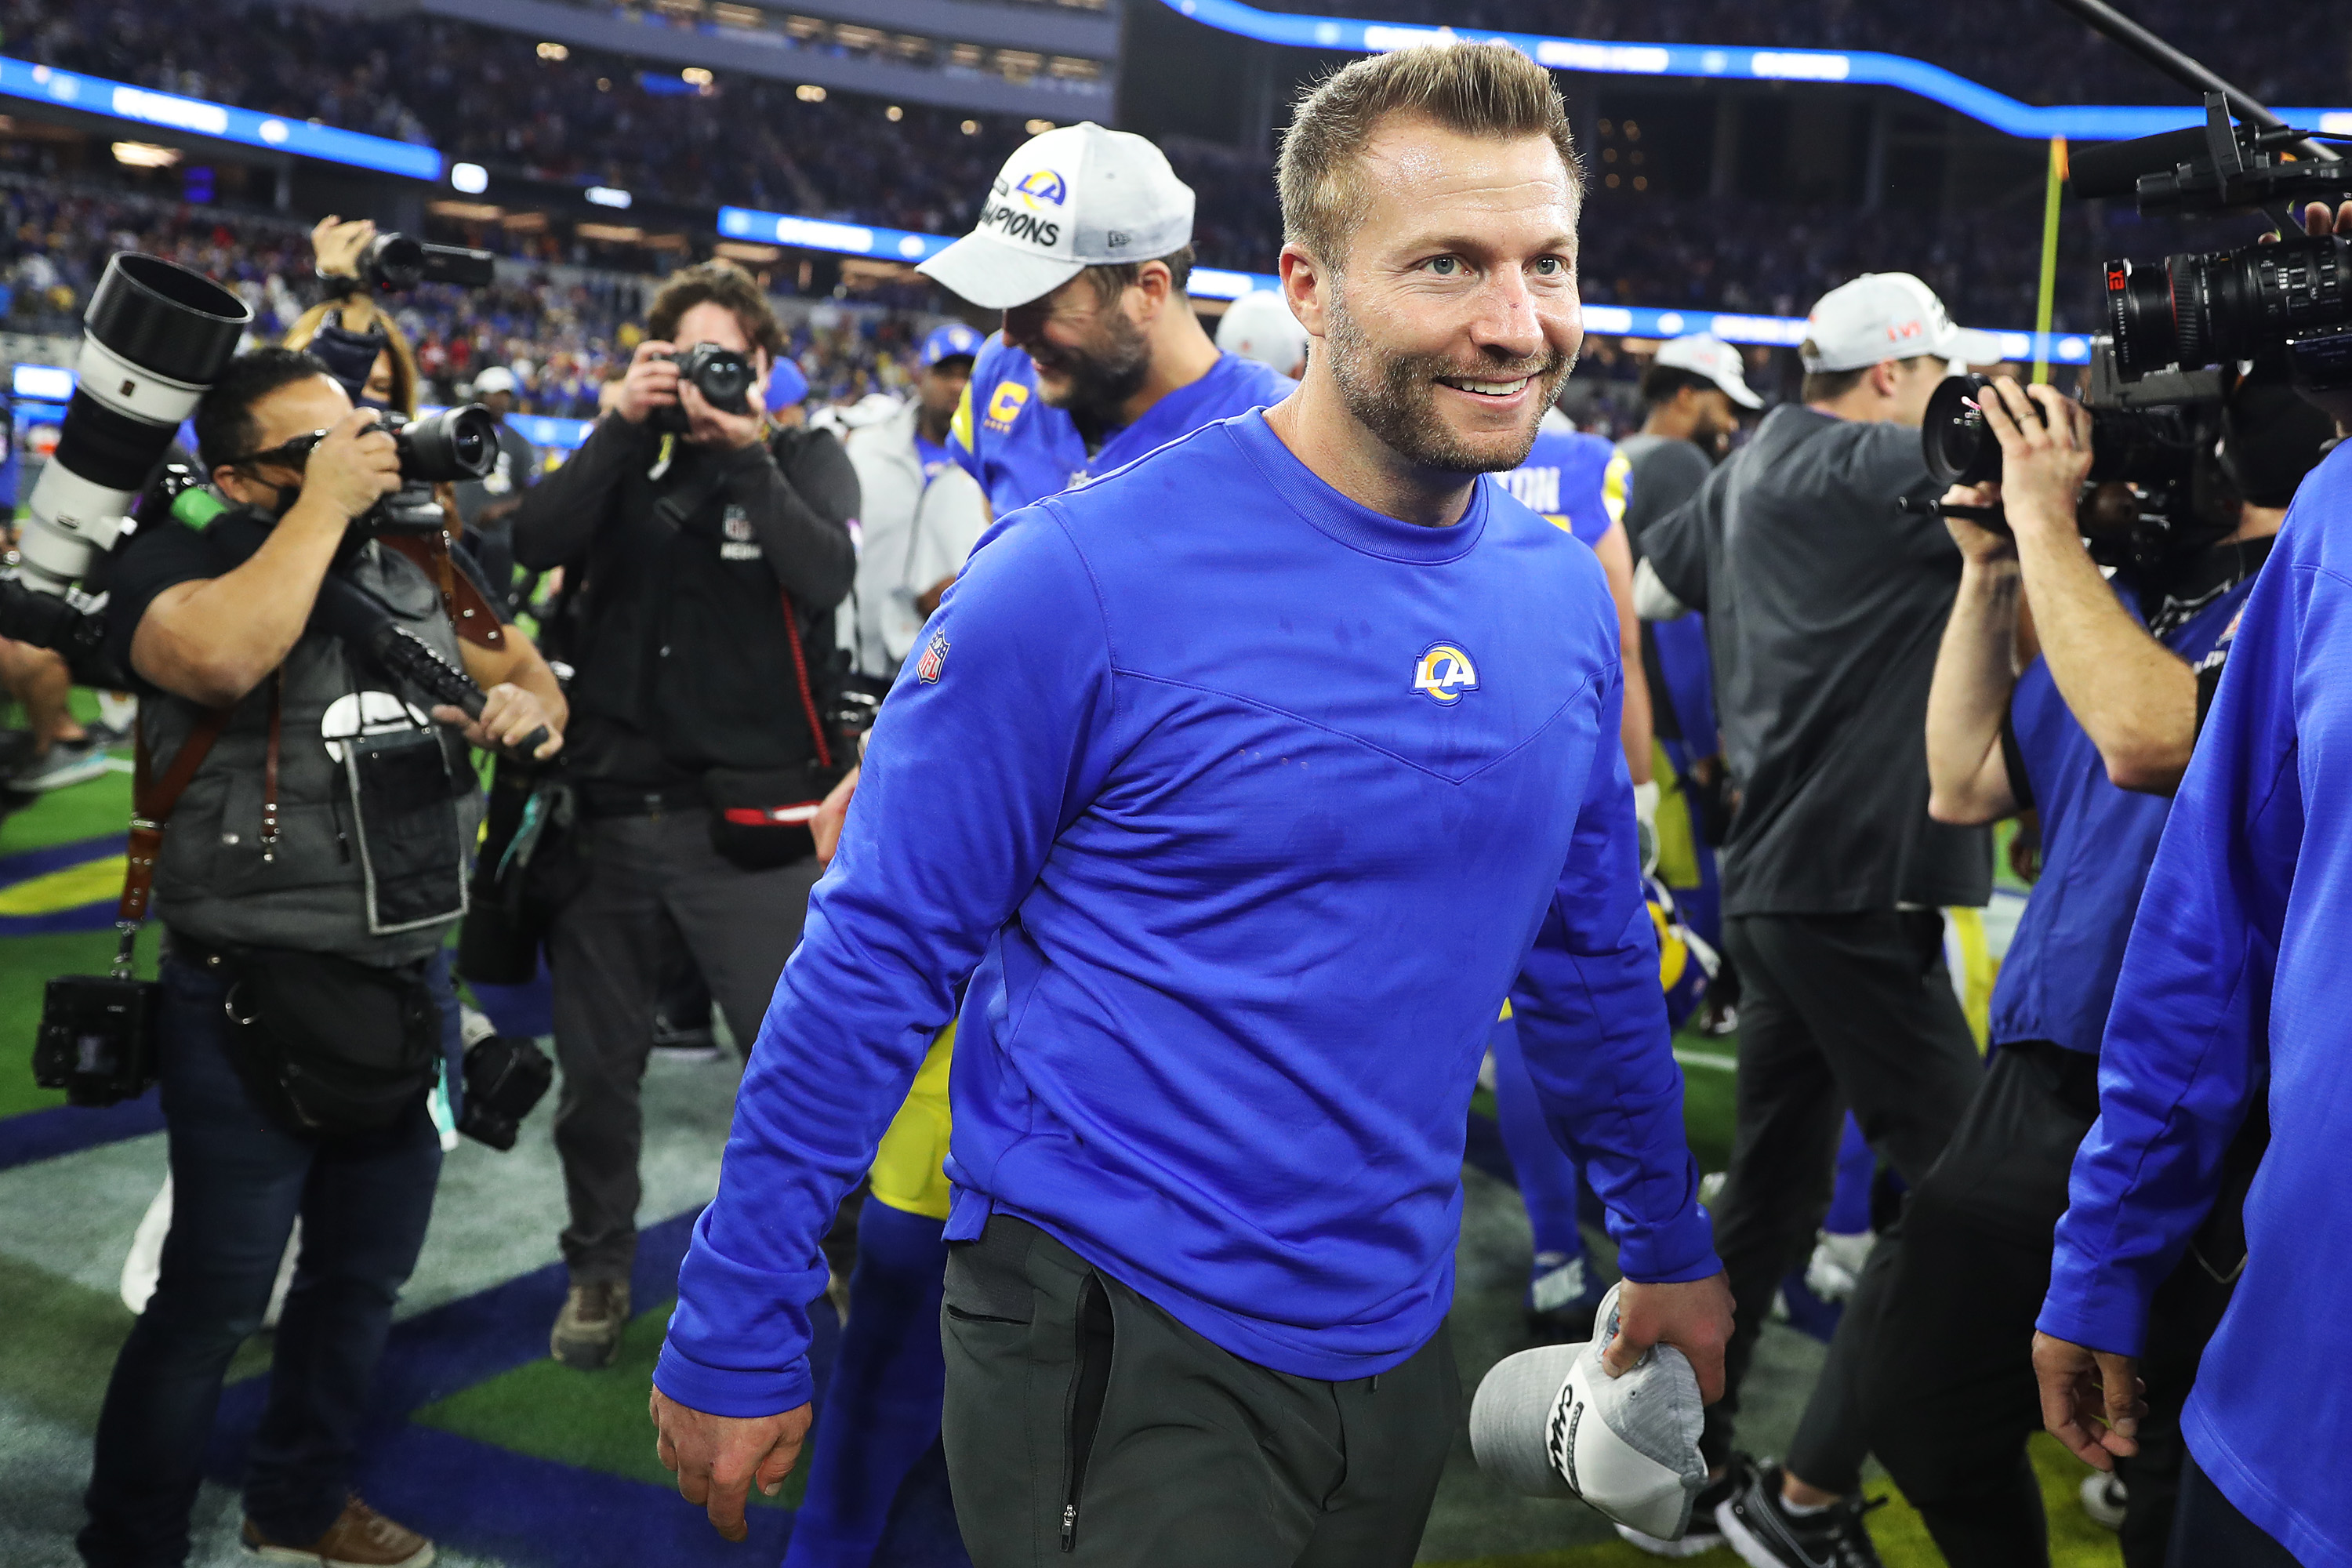 Sean McVay Stats, Bio, Super Bowl History, Contract, Career Earnings and More Ahead of Super Bowl 56 in 2022 